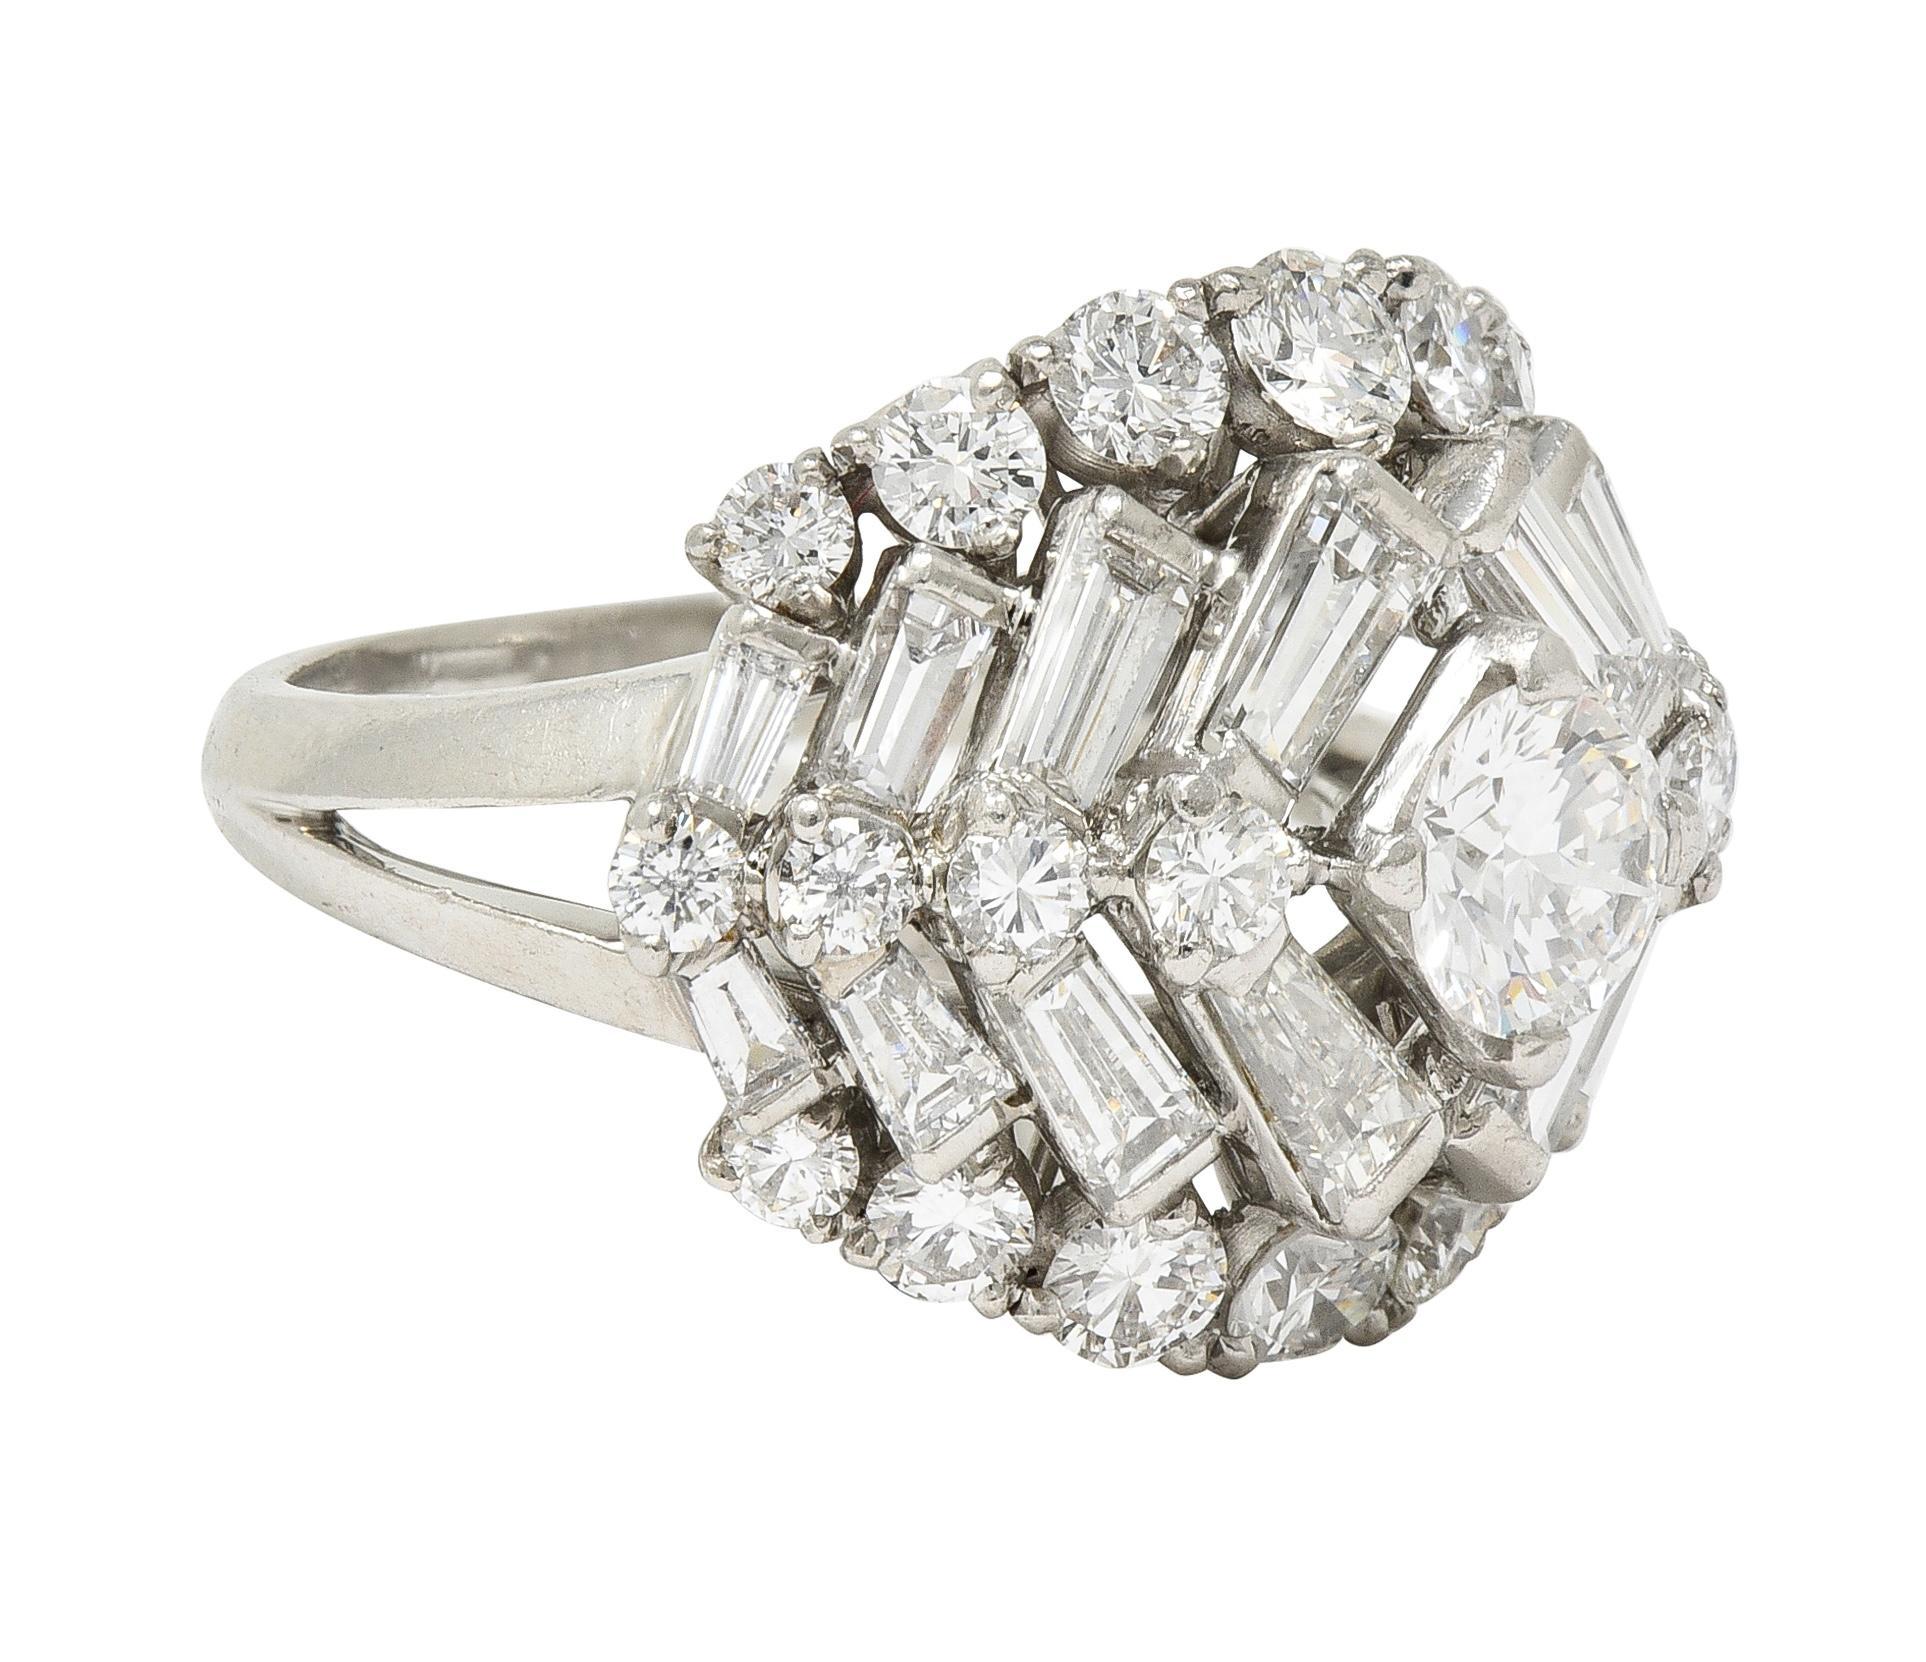 Centering a transitional cut diamond weighing approximately 0.57 carat total 
G color with VS2 clarity - prong set with a stepped bombé shaped surround 
Bar and prong set throughout with transitional and baguette cut diamonds
Weighing approximately